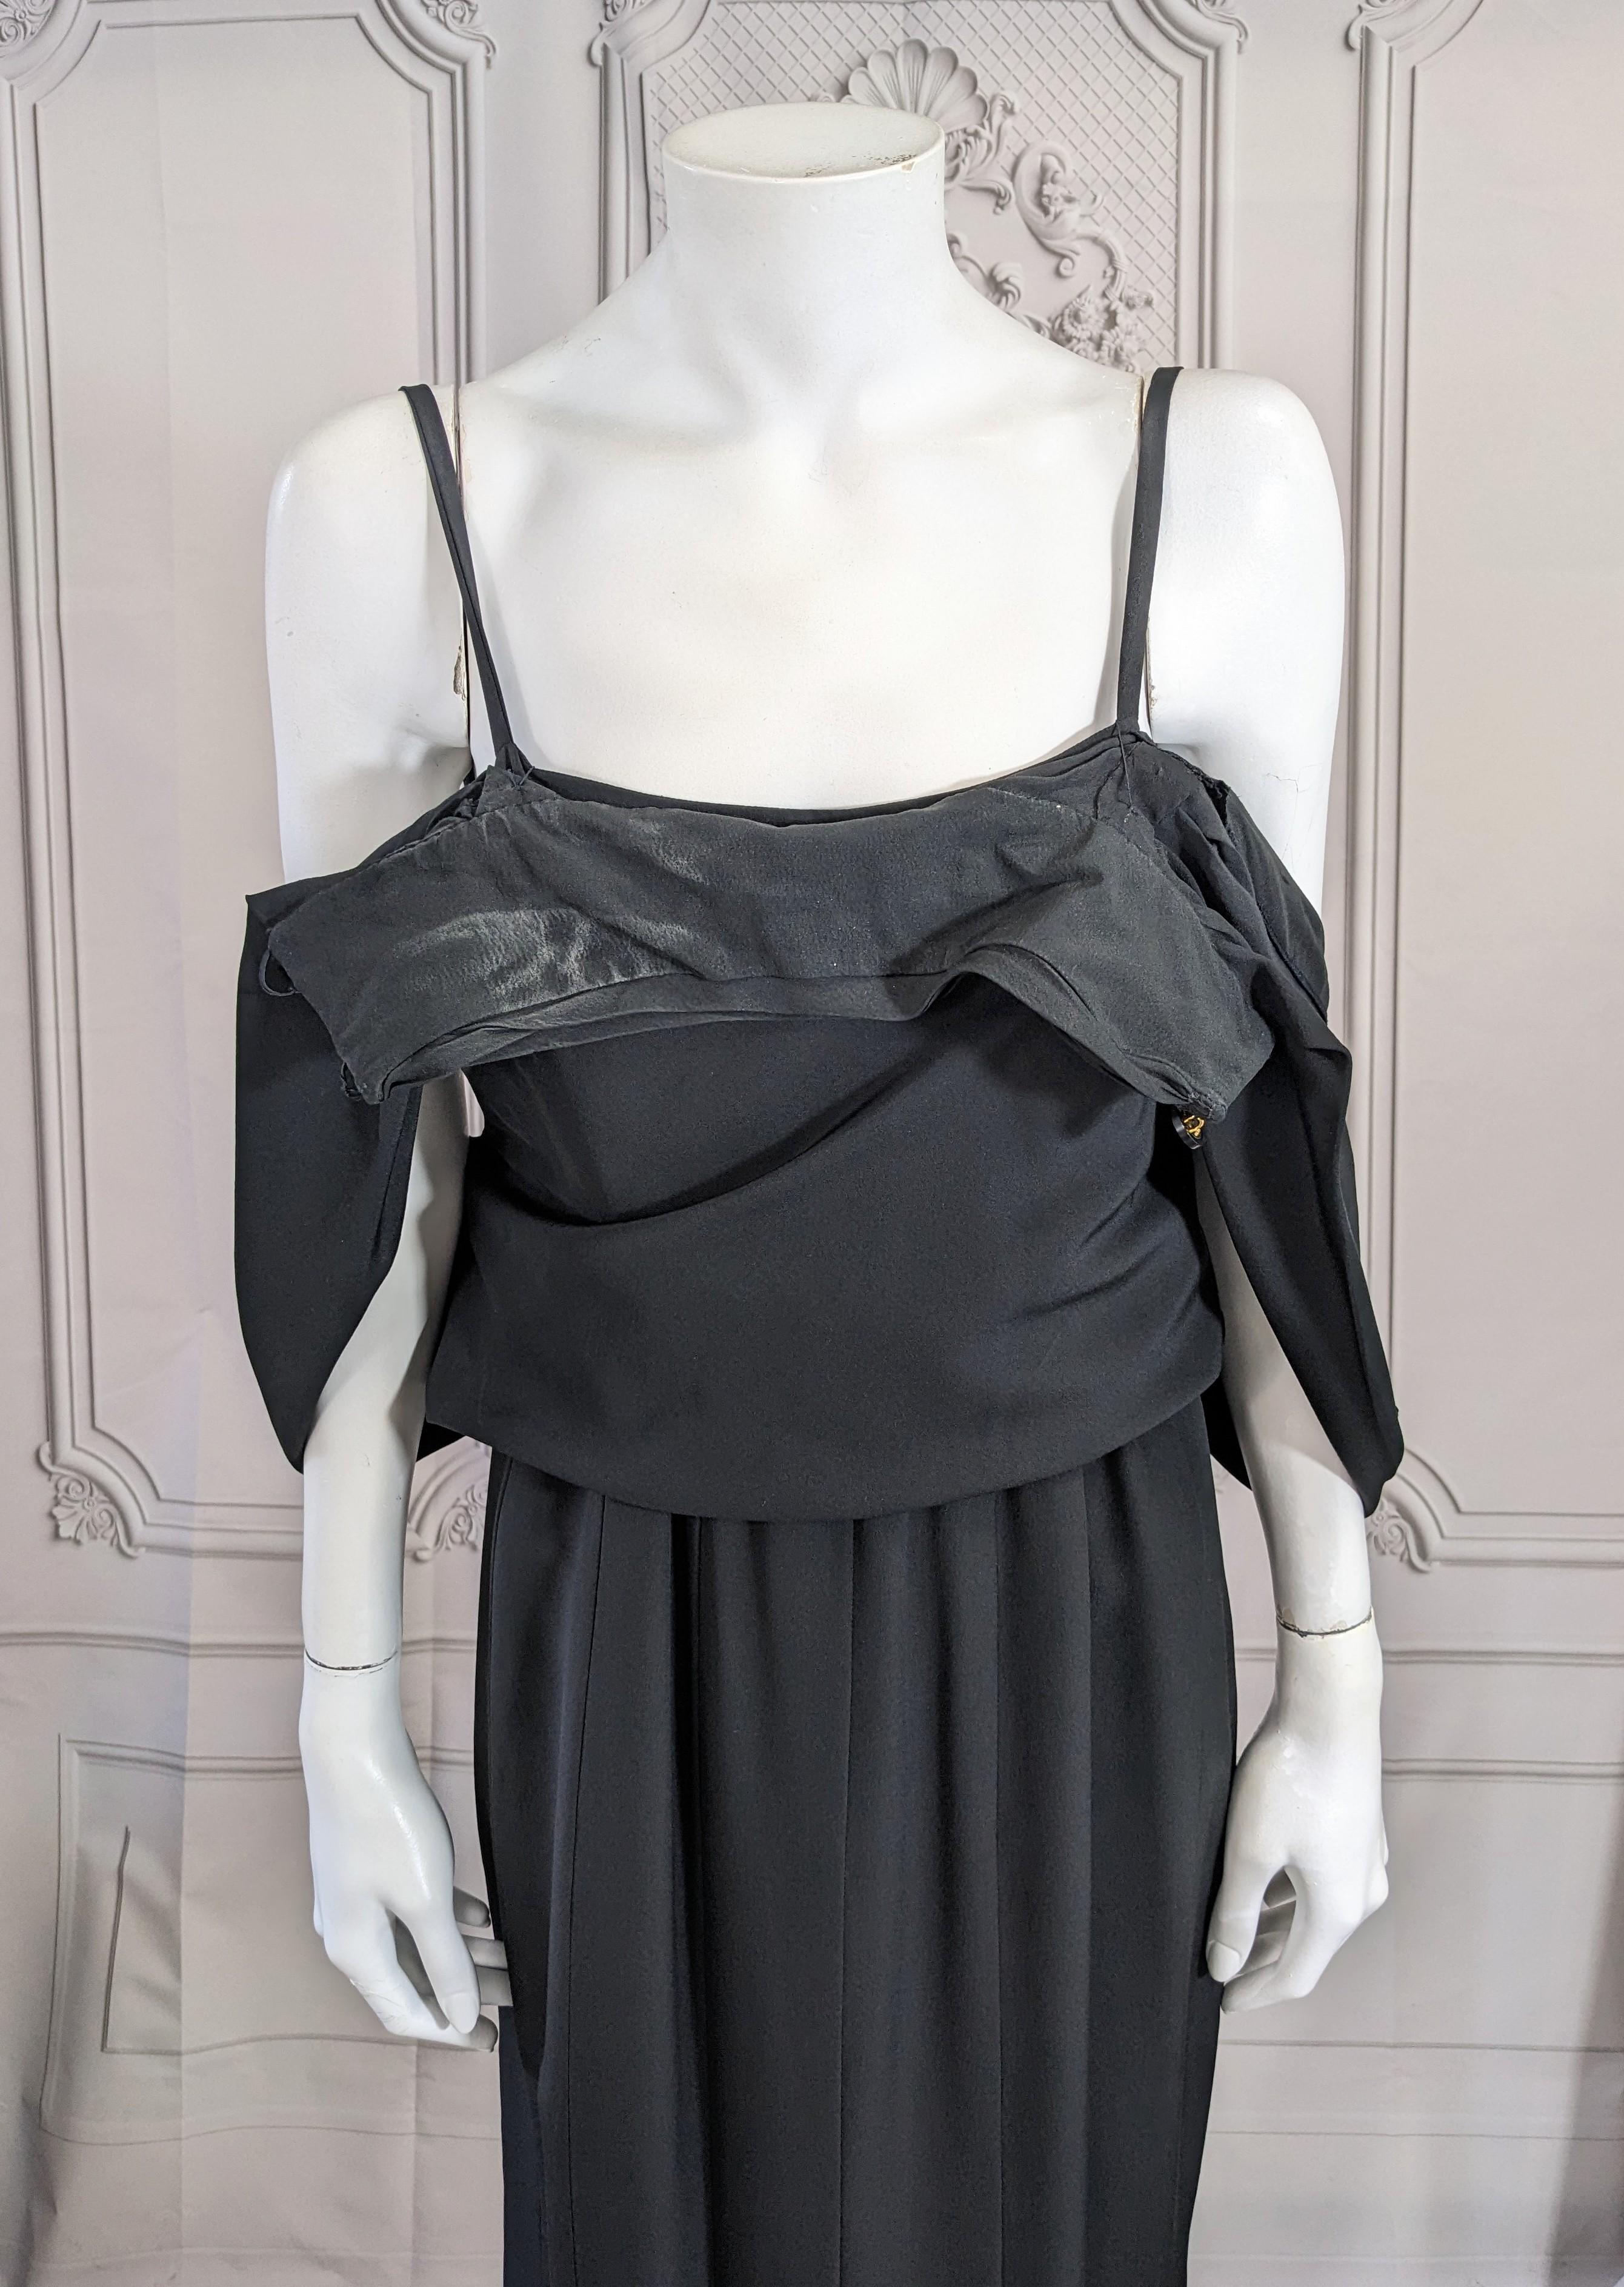 Chanel High Neck Column Gown For Sale 4